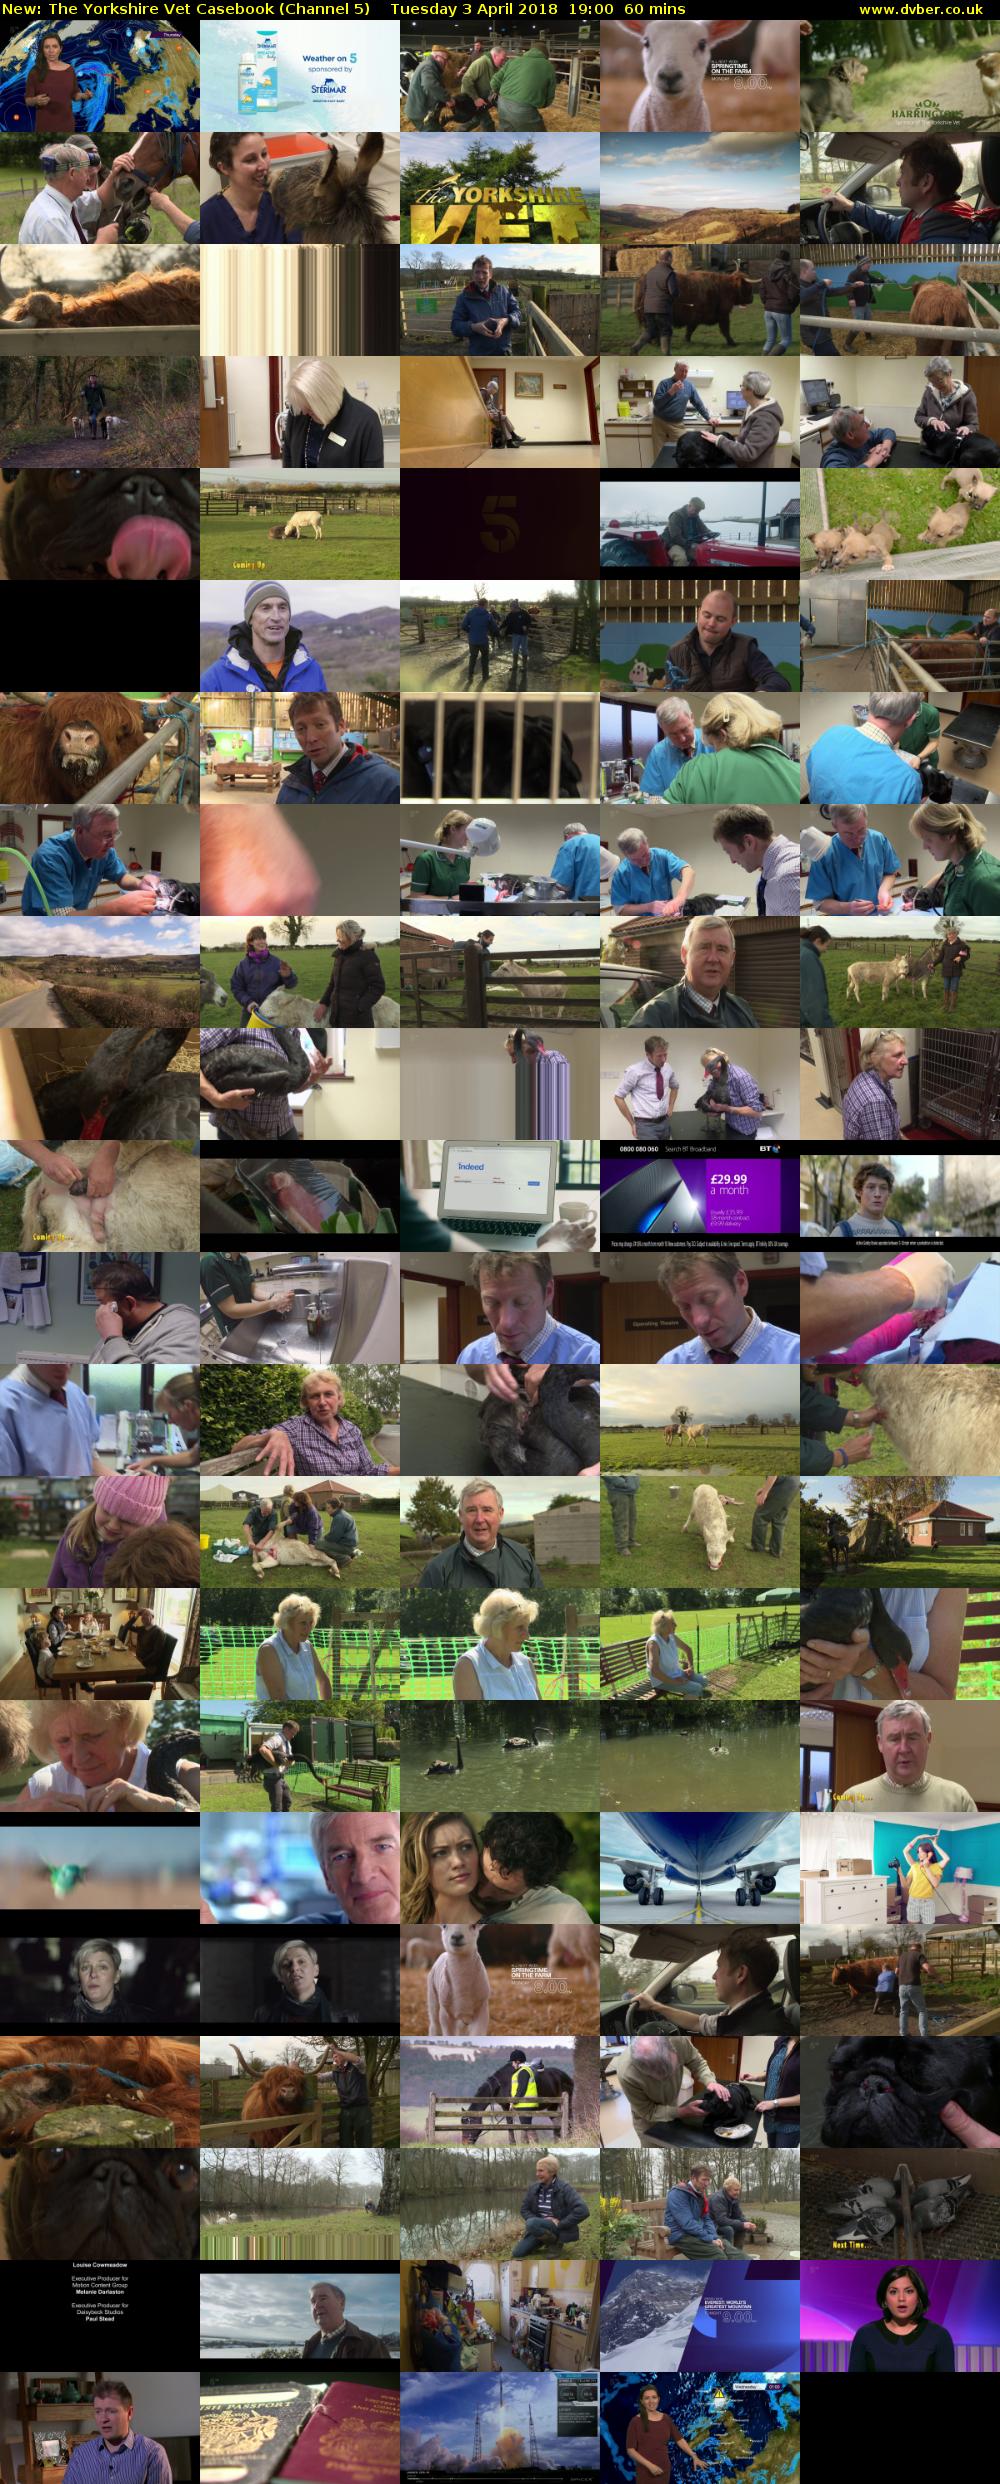 The Yorkshire Vet Casebook (Channel 5) Tuesday 3 April 2018 19:00 - 20:00